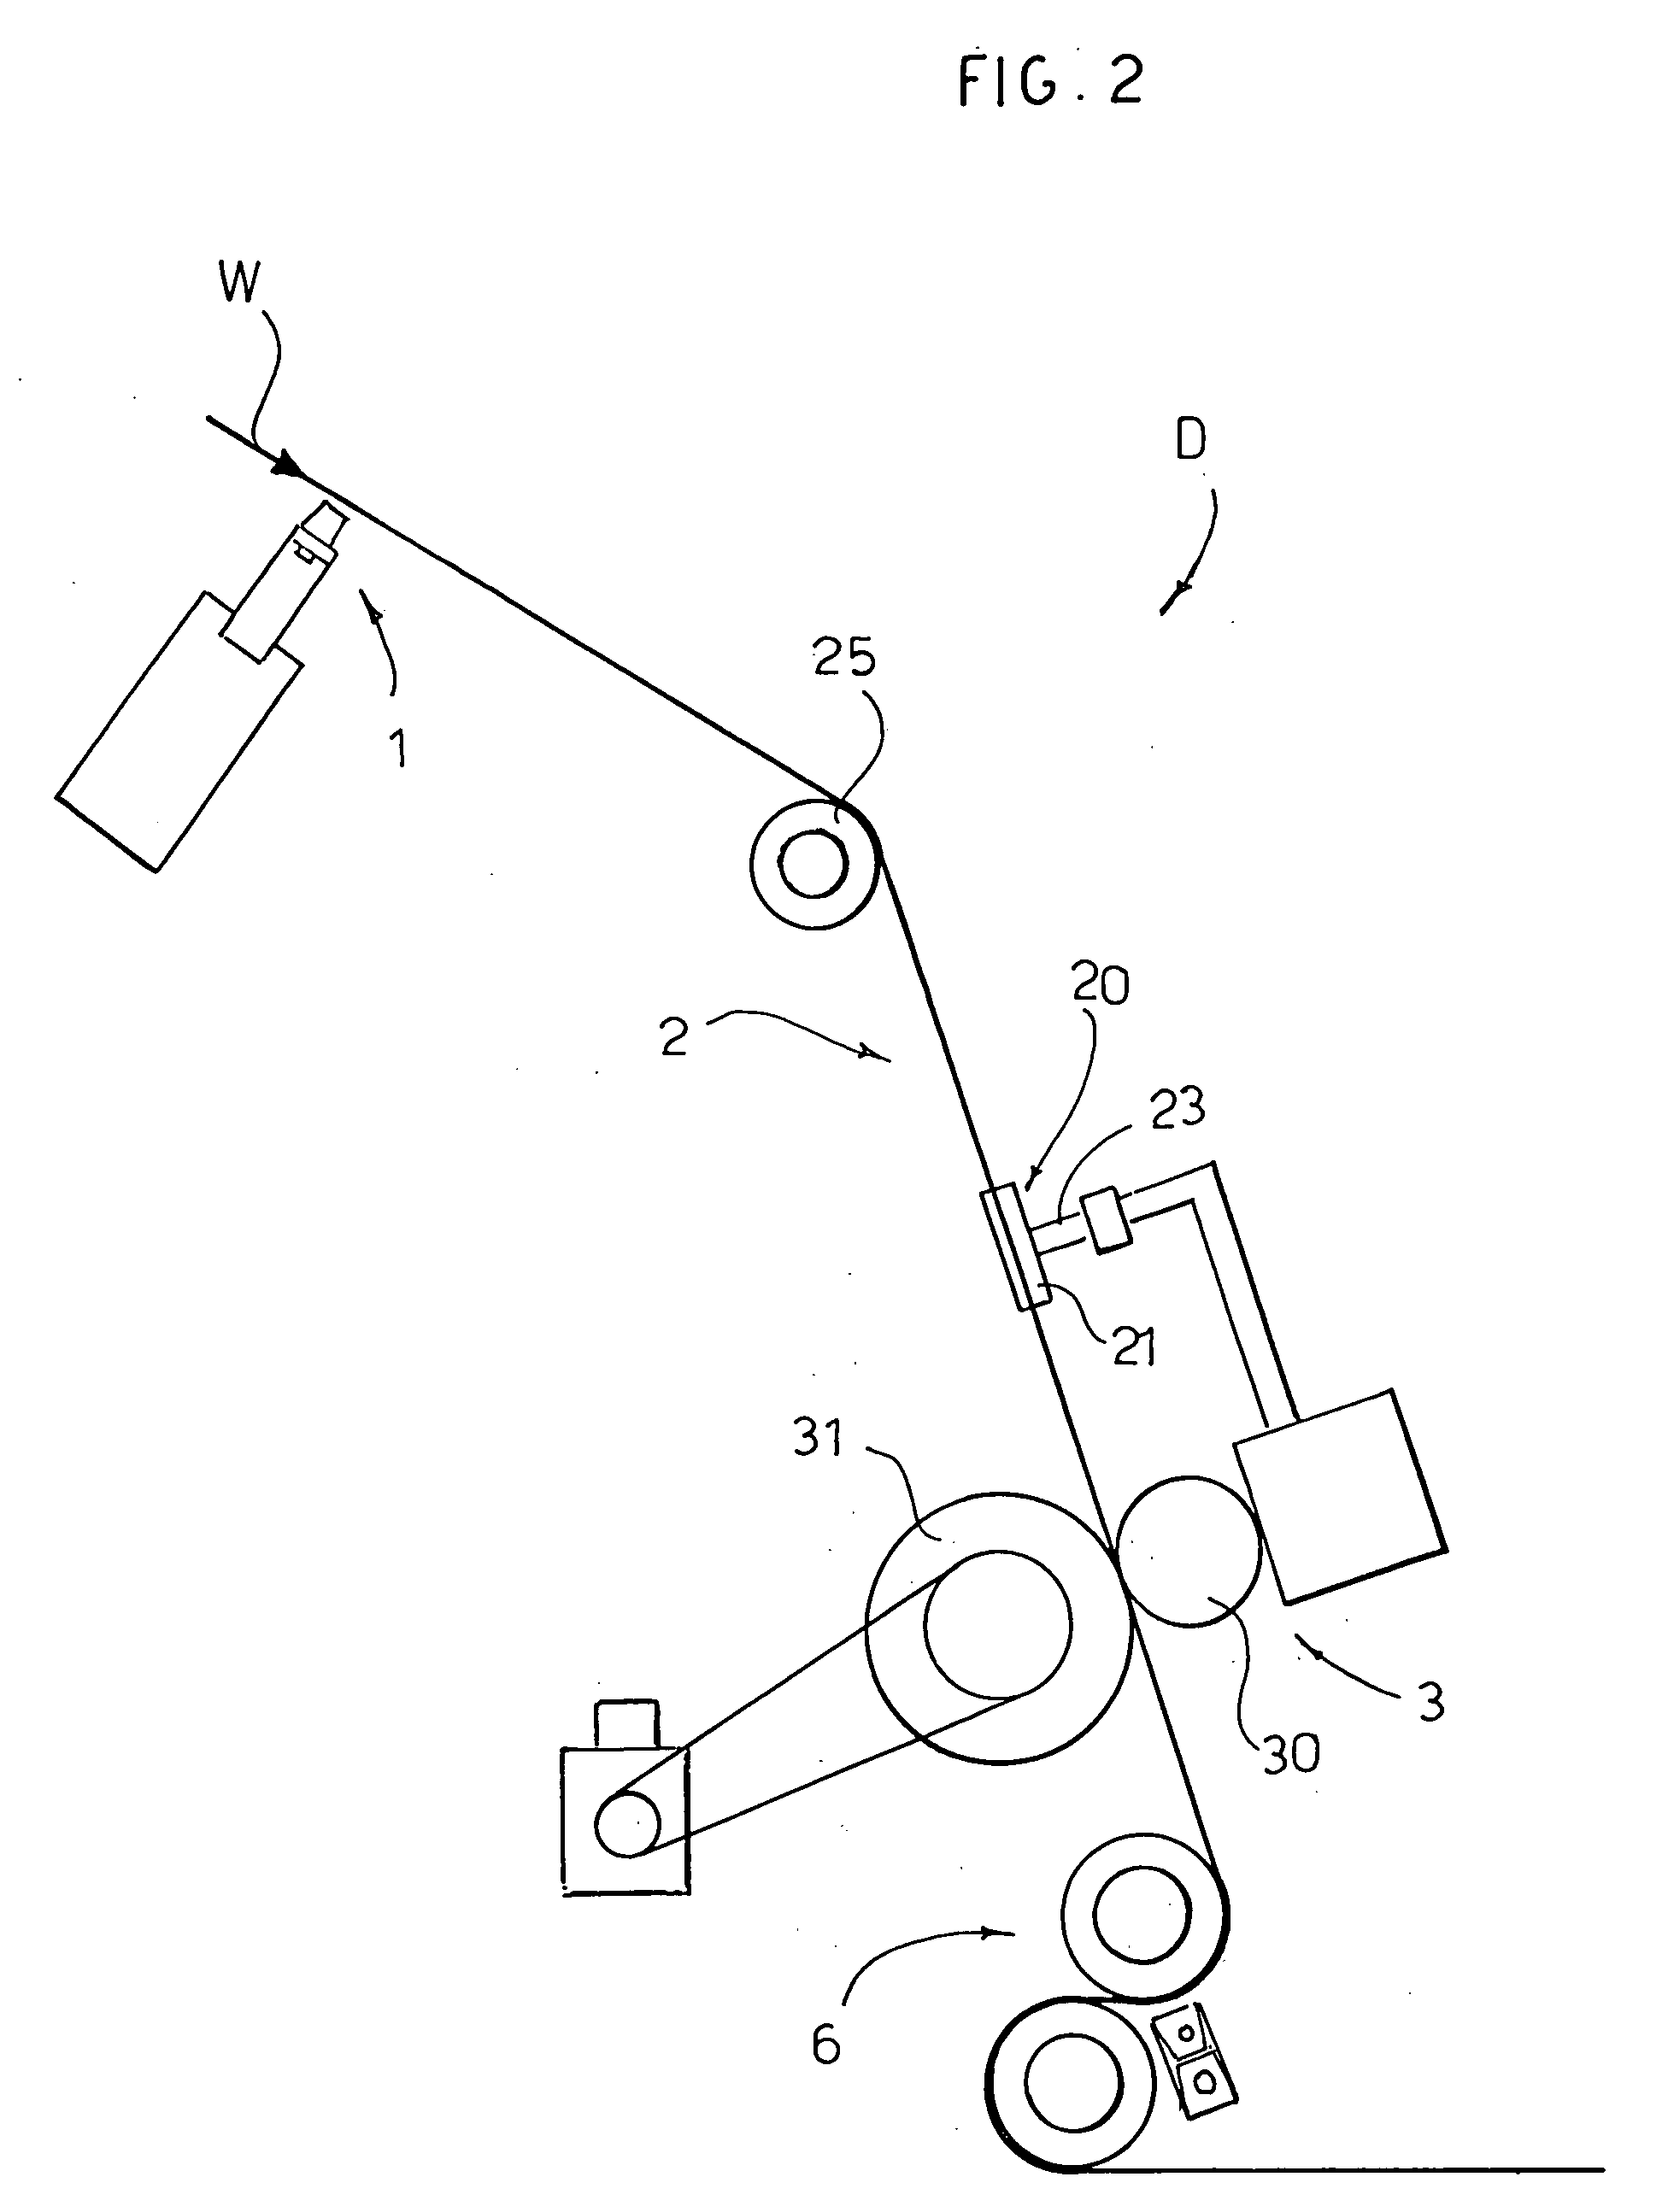 Device and method for stiffening a web destined to be wound in logs